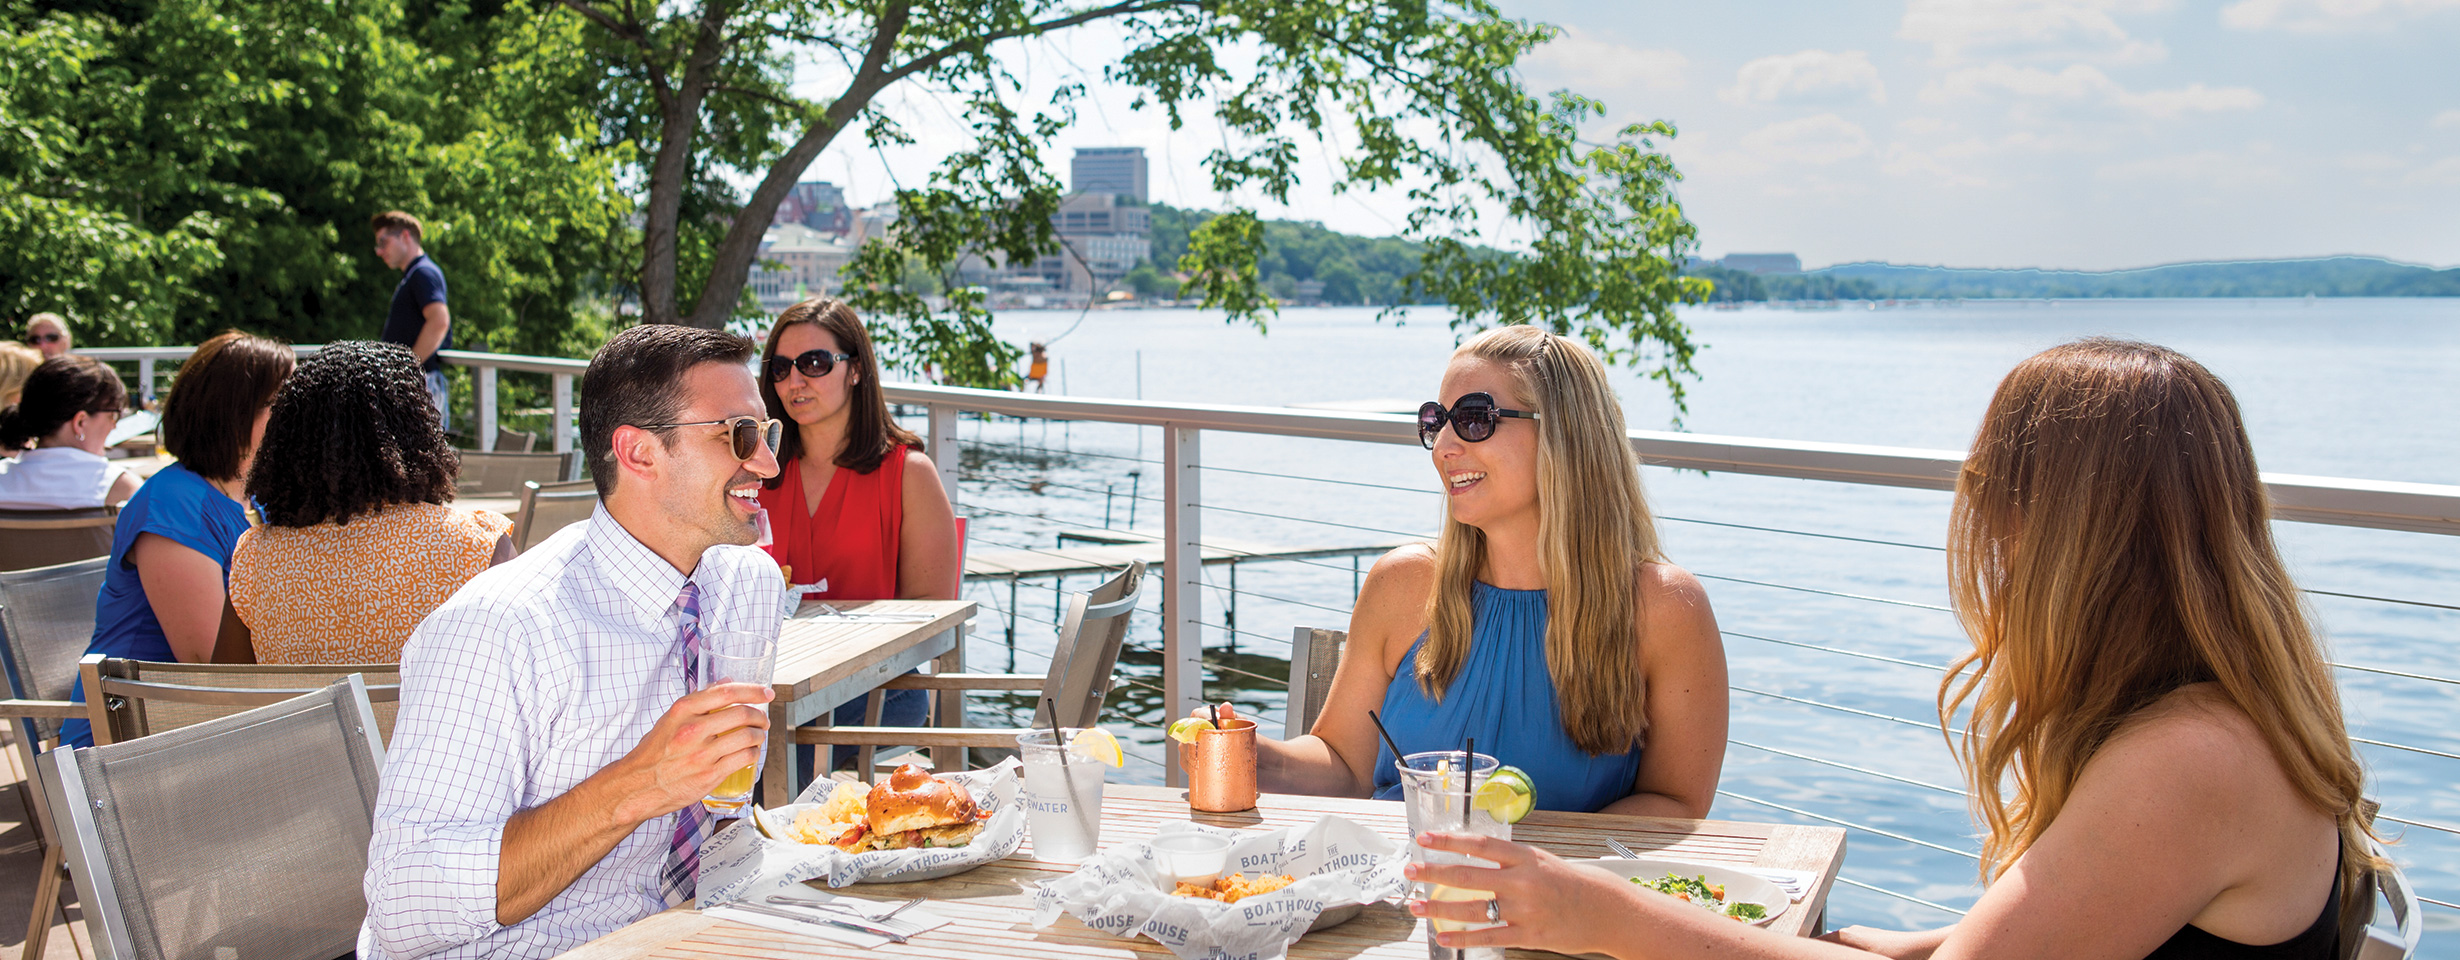 Waterfront Dining Restaurants in Madison, WI